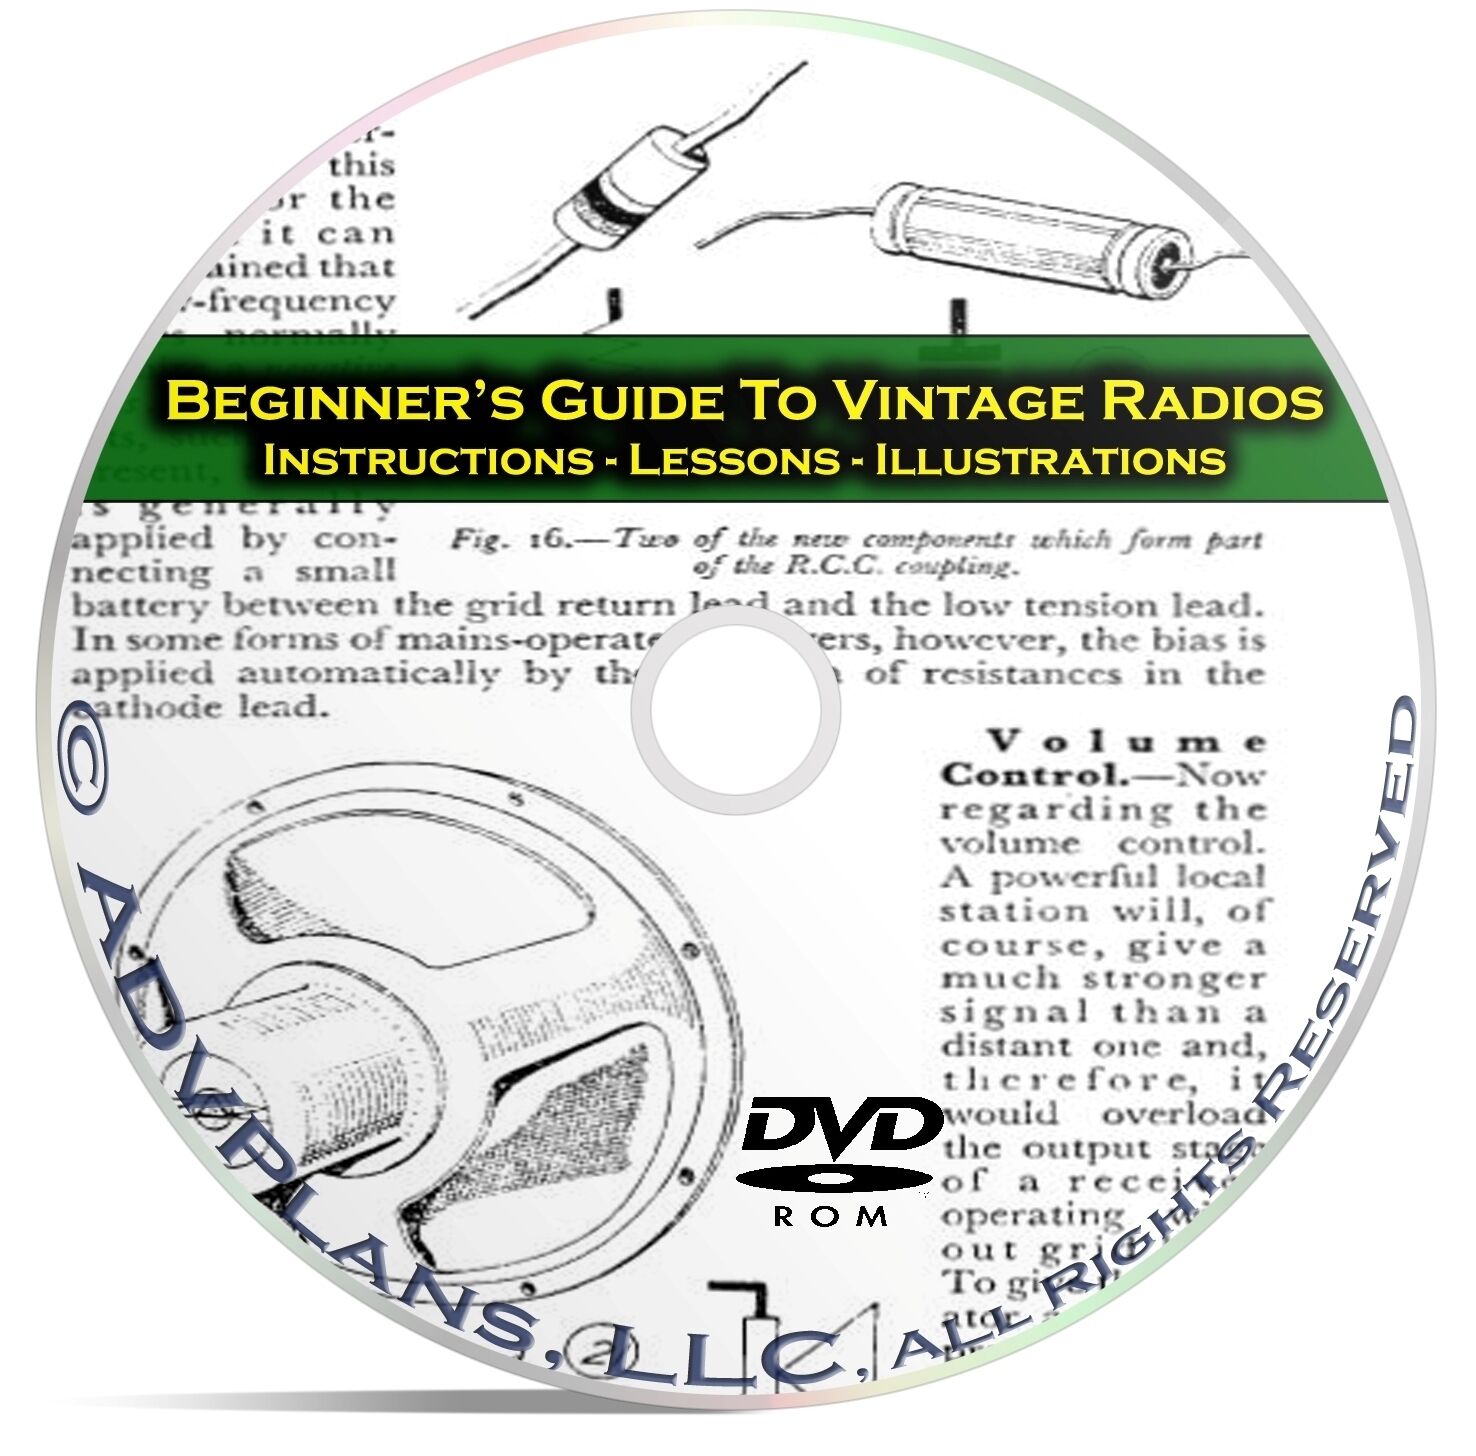 How to Fix & Repair Vintage Old Time Radios - Beginners Guide Books CD C10